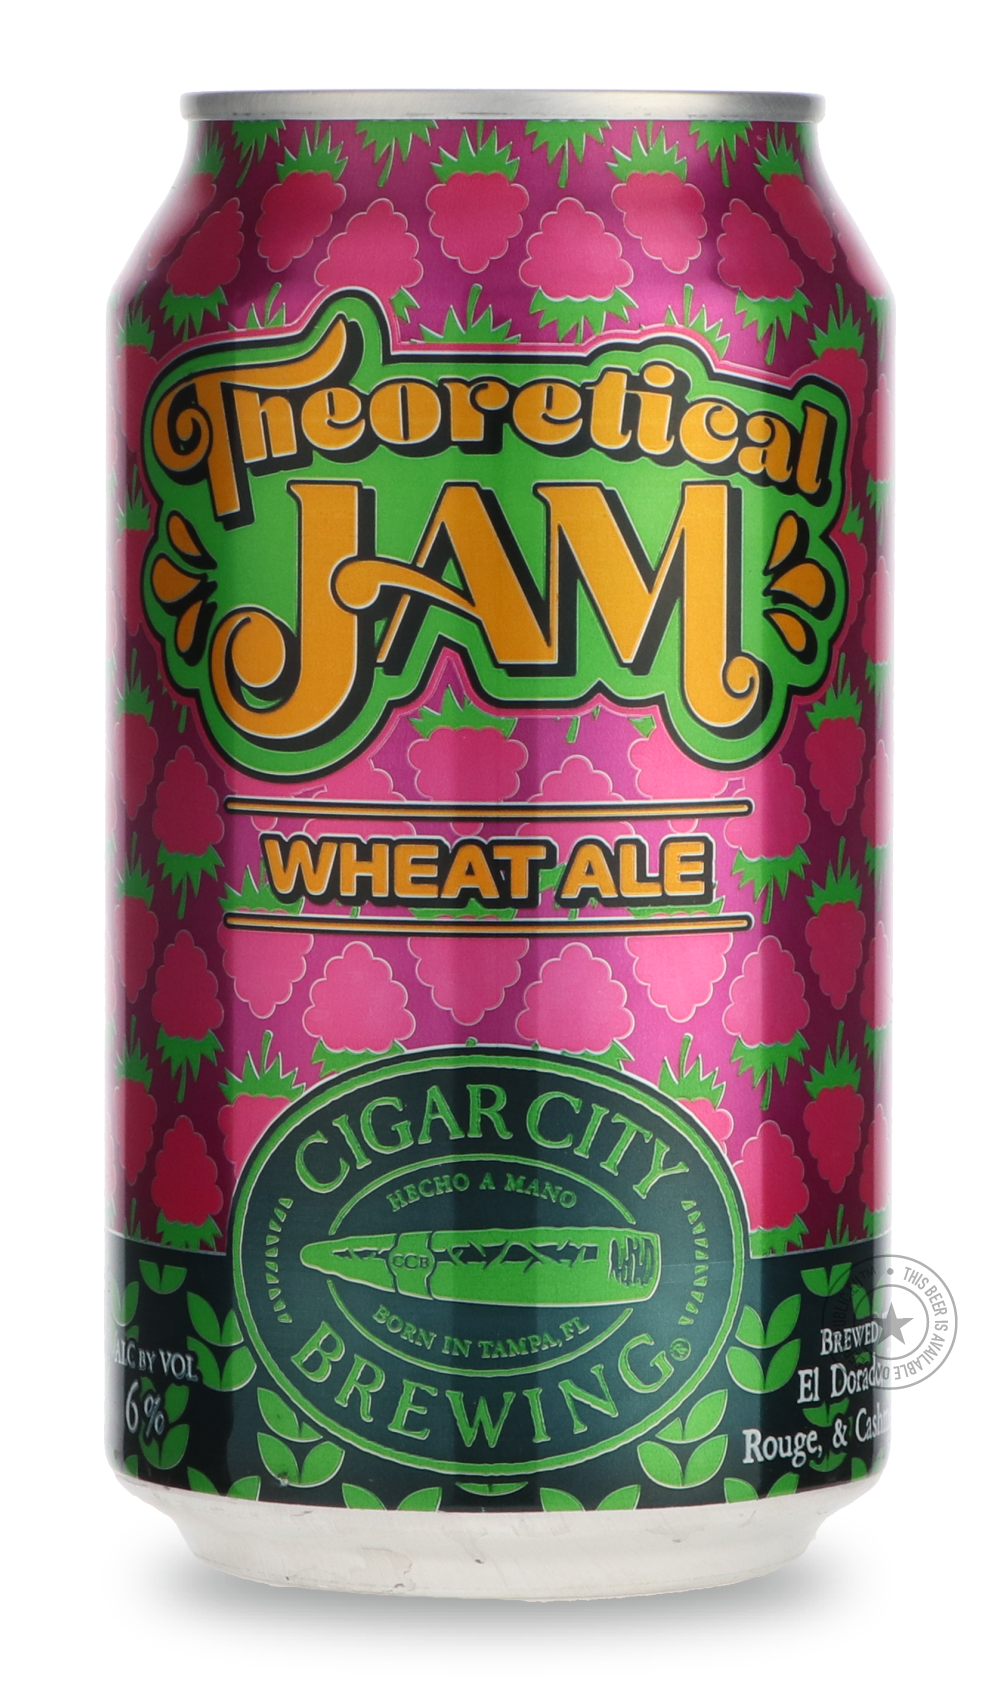 -Cigar City- Theoretical Jam-Pale- Only @ Beer Republic - The best online beer store for American & Canadian craft beer - Buy beer online from the USA and Canada - Bier online kopen - Amerikaans bier kopen - Craft beer store - Craft beer kopen - Amerikanisch bier kaufen - Bier online kaufen - Acheter biere online - IPA - Stout - Porter - New England IPA - Hazy IPA - Imperial Stout - Barrel Aged - Barrel Aged Imperial Stout - Brown - Dark beer - Blond - Blonde - Pilsner - Lager - Wheat - Weizen - Amber - Bar